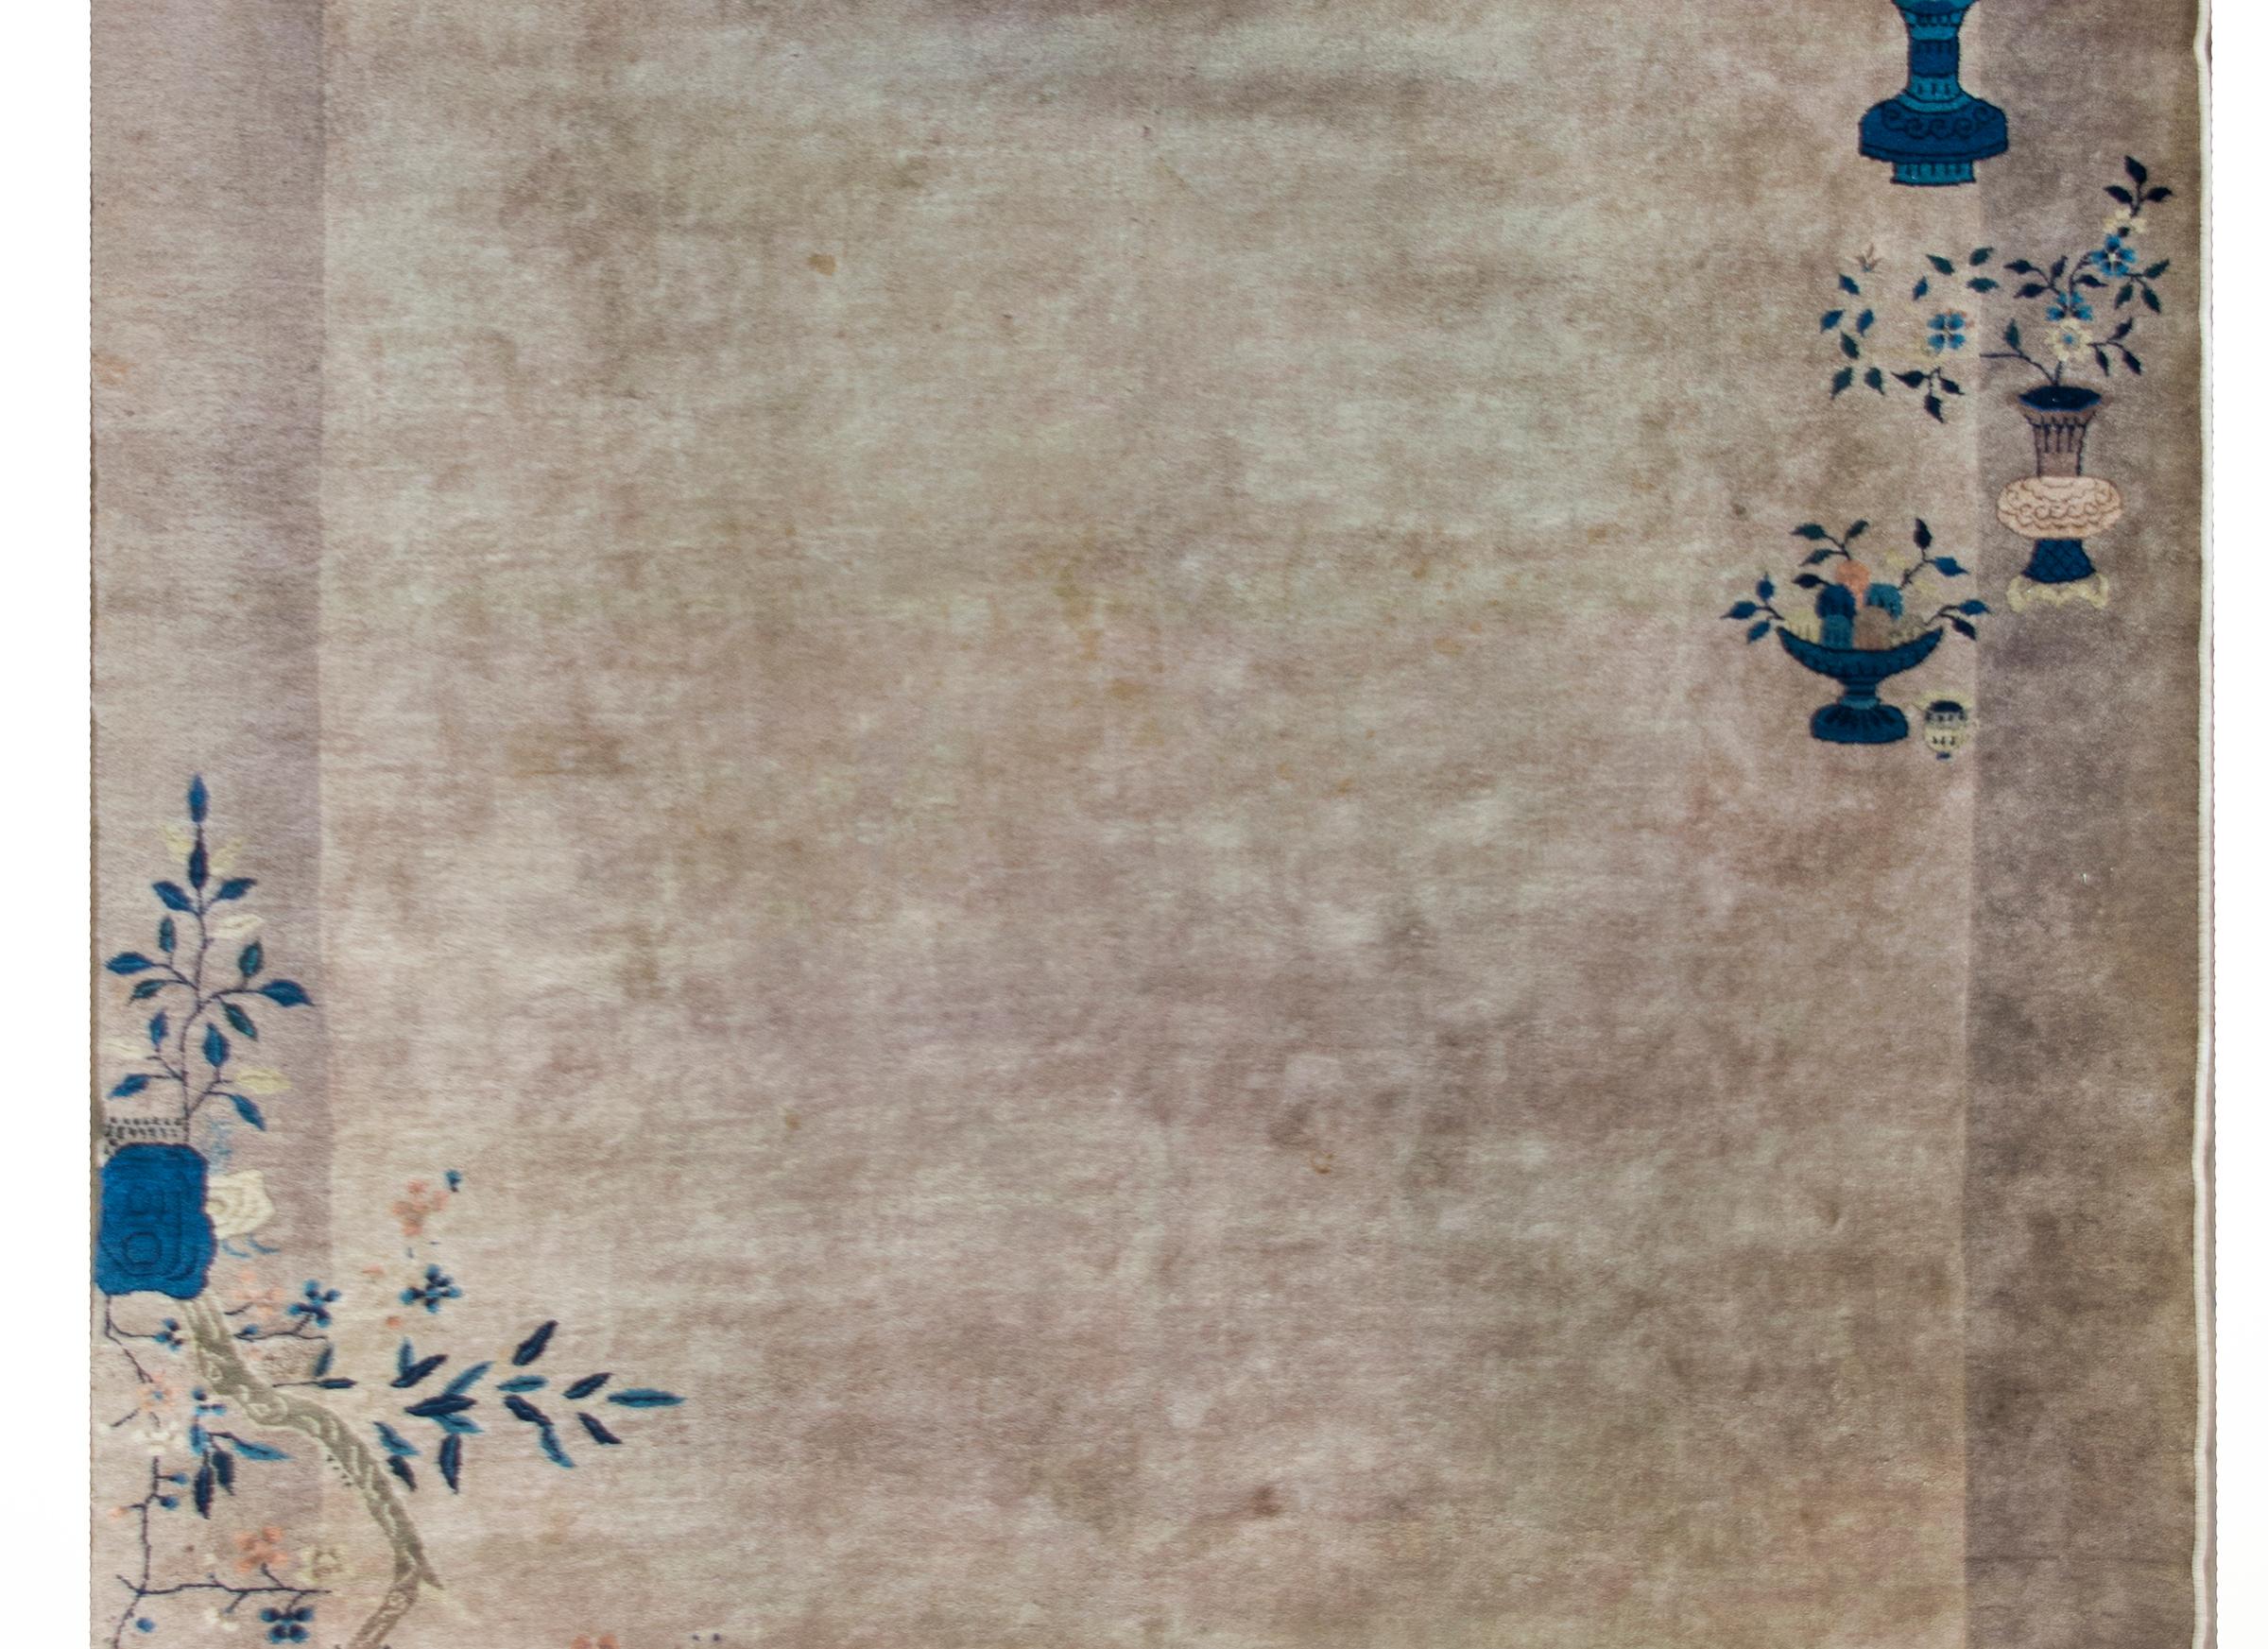 An early 20th century Chinese Art Deco rug with a tone-on-tone gray field surrounded by a wide gray border, and indigo scholar's vases in opposing corners each potted with auspicious flowers including cherry blossoms and peonies.